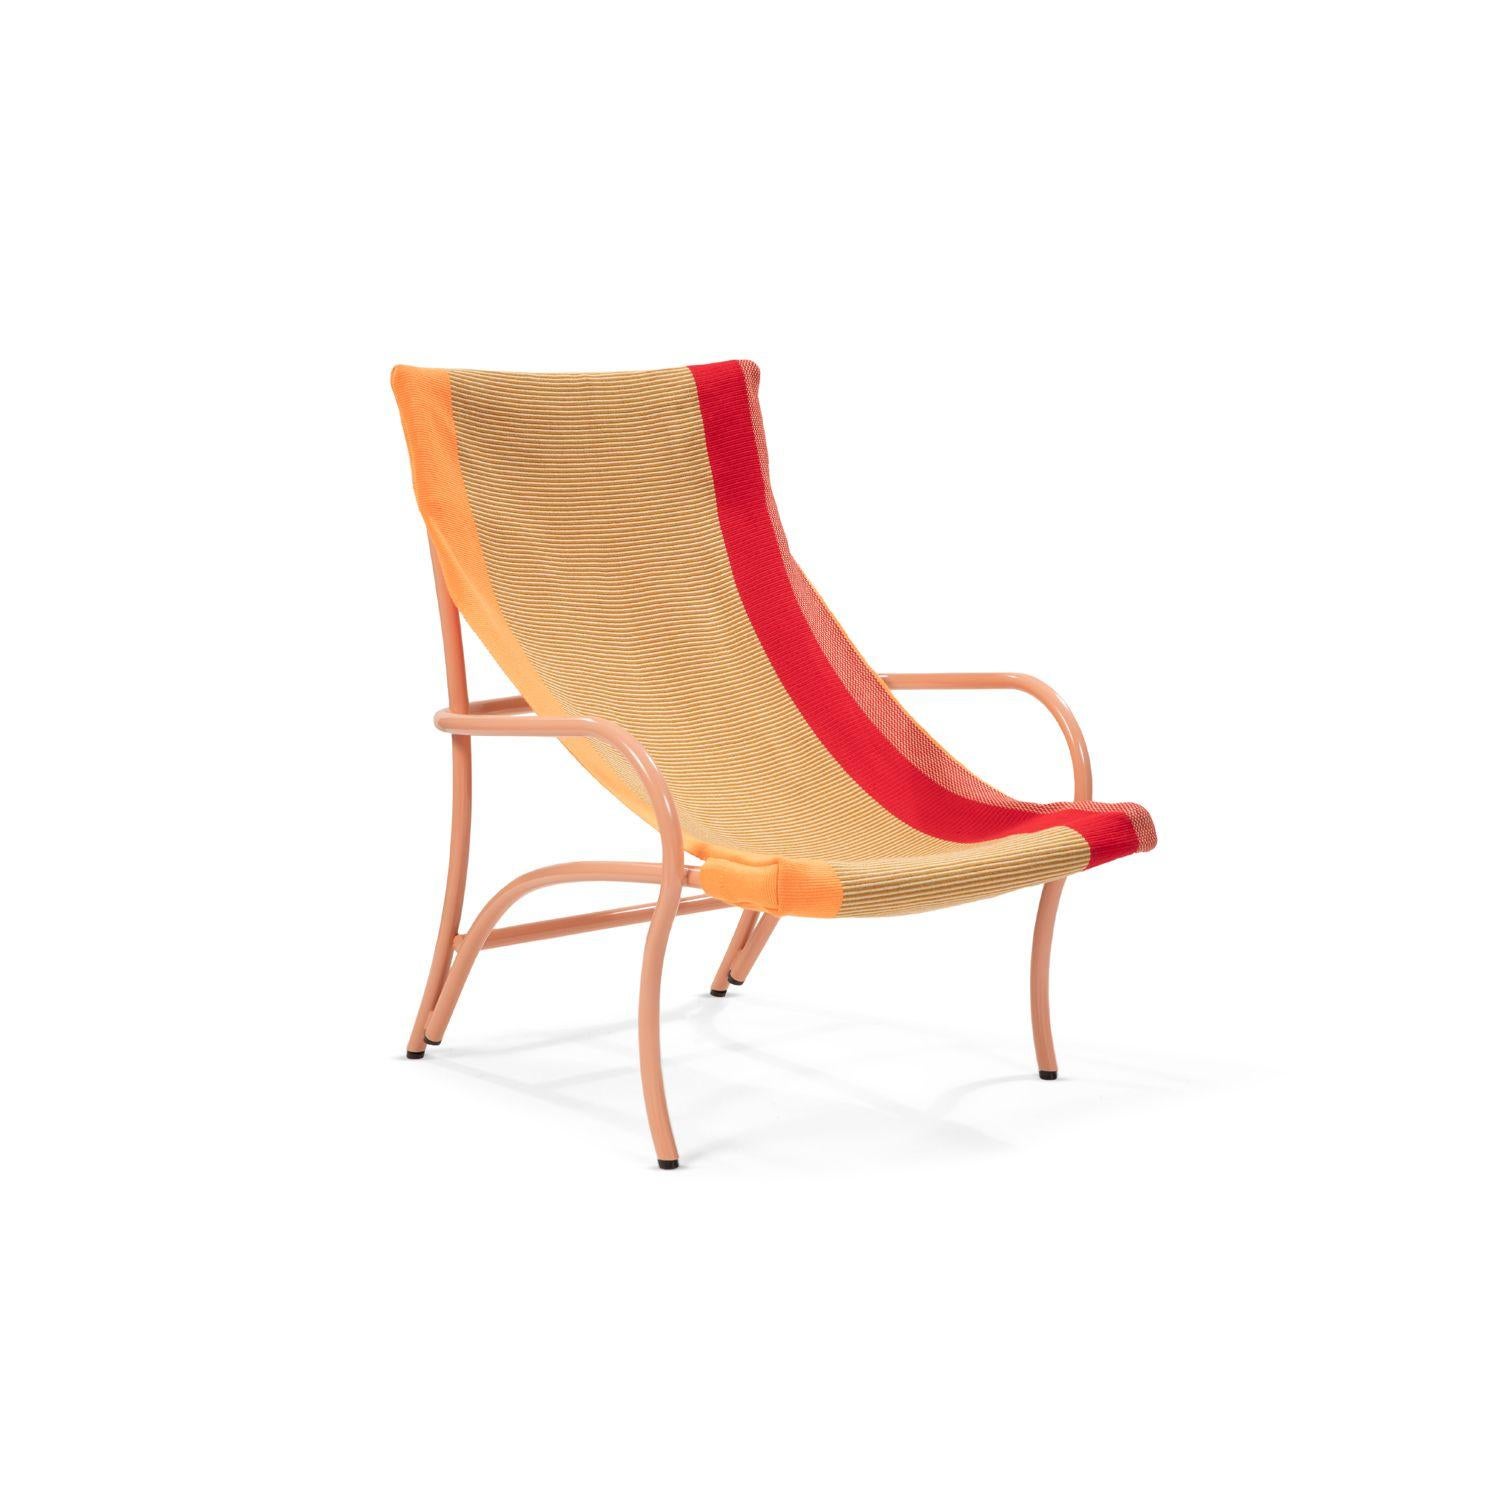 With the Maraca Lounge Chair, Sebastian Herkner has created a charming spot to relax, inspired by the traditional Colombian hammocks. The gentle curves of the steel frame mirror the bend of the seating fabric, whose pattern represents the pure joy